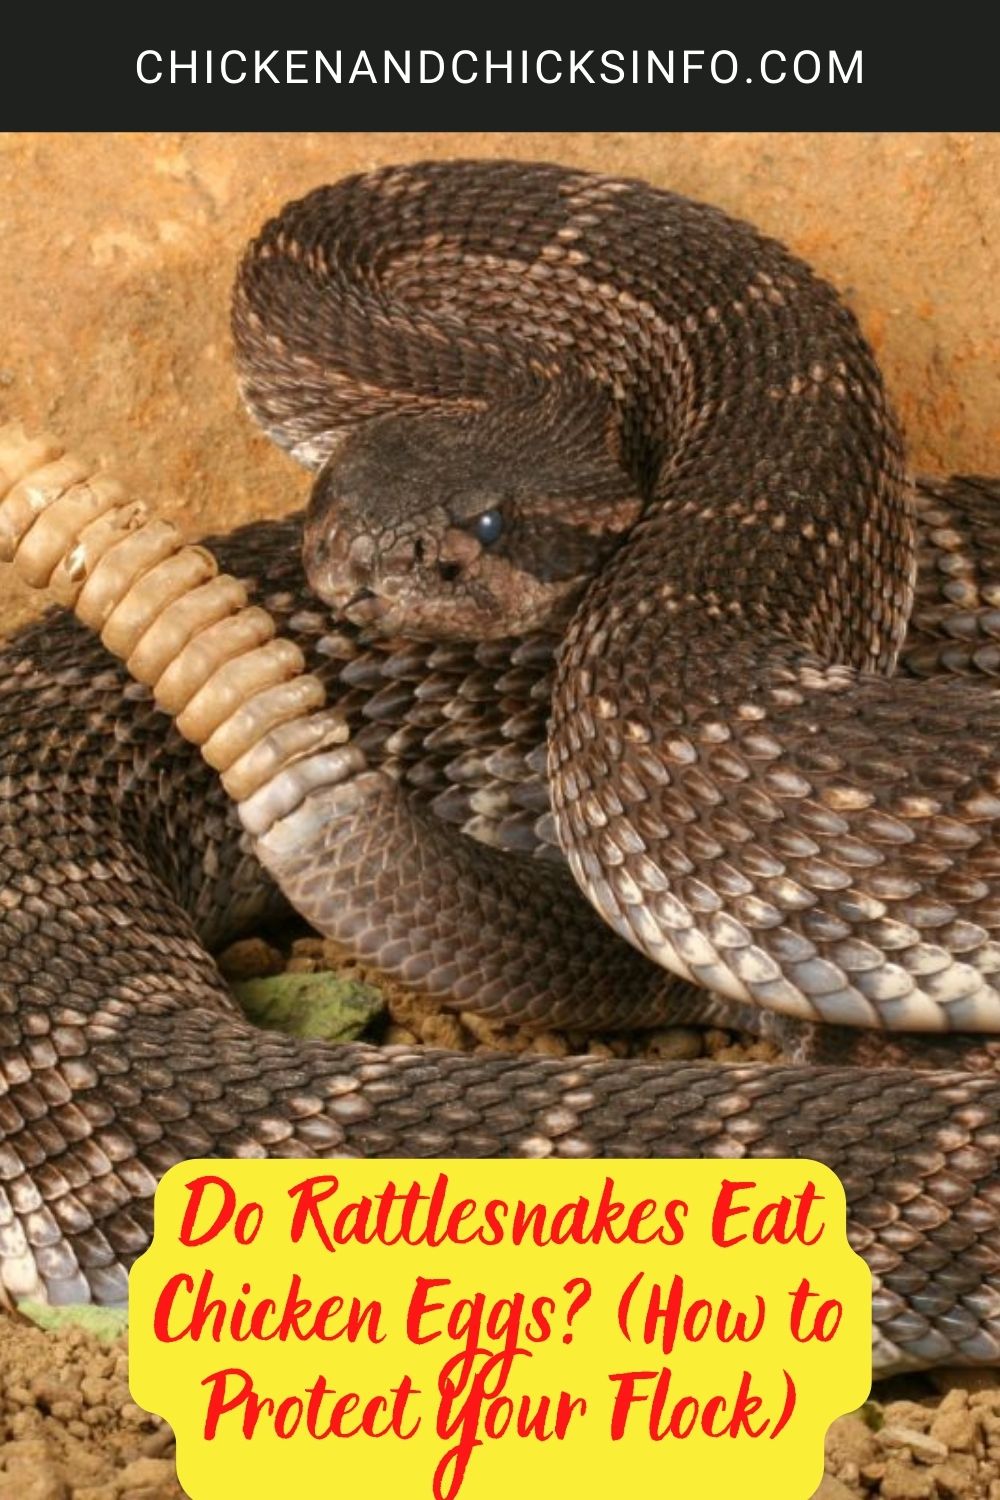 Do Rattlesnakes Eat Chicken Eggs? (How to Protect Your Flock) psoter.
